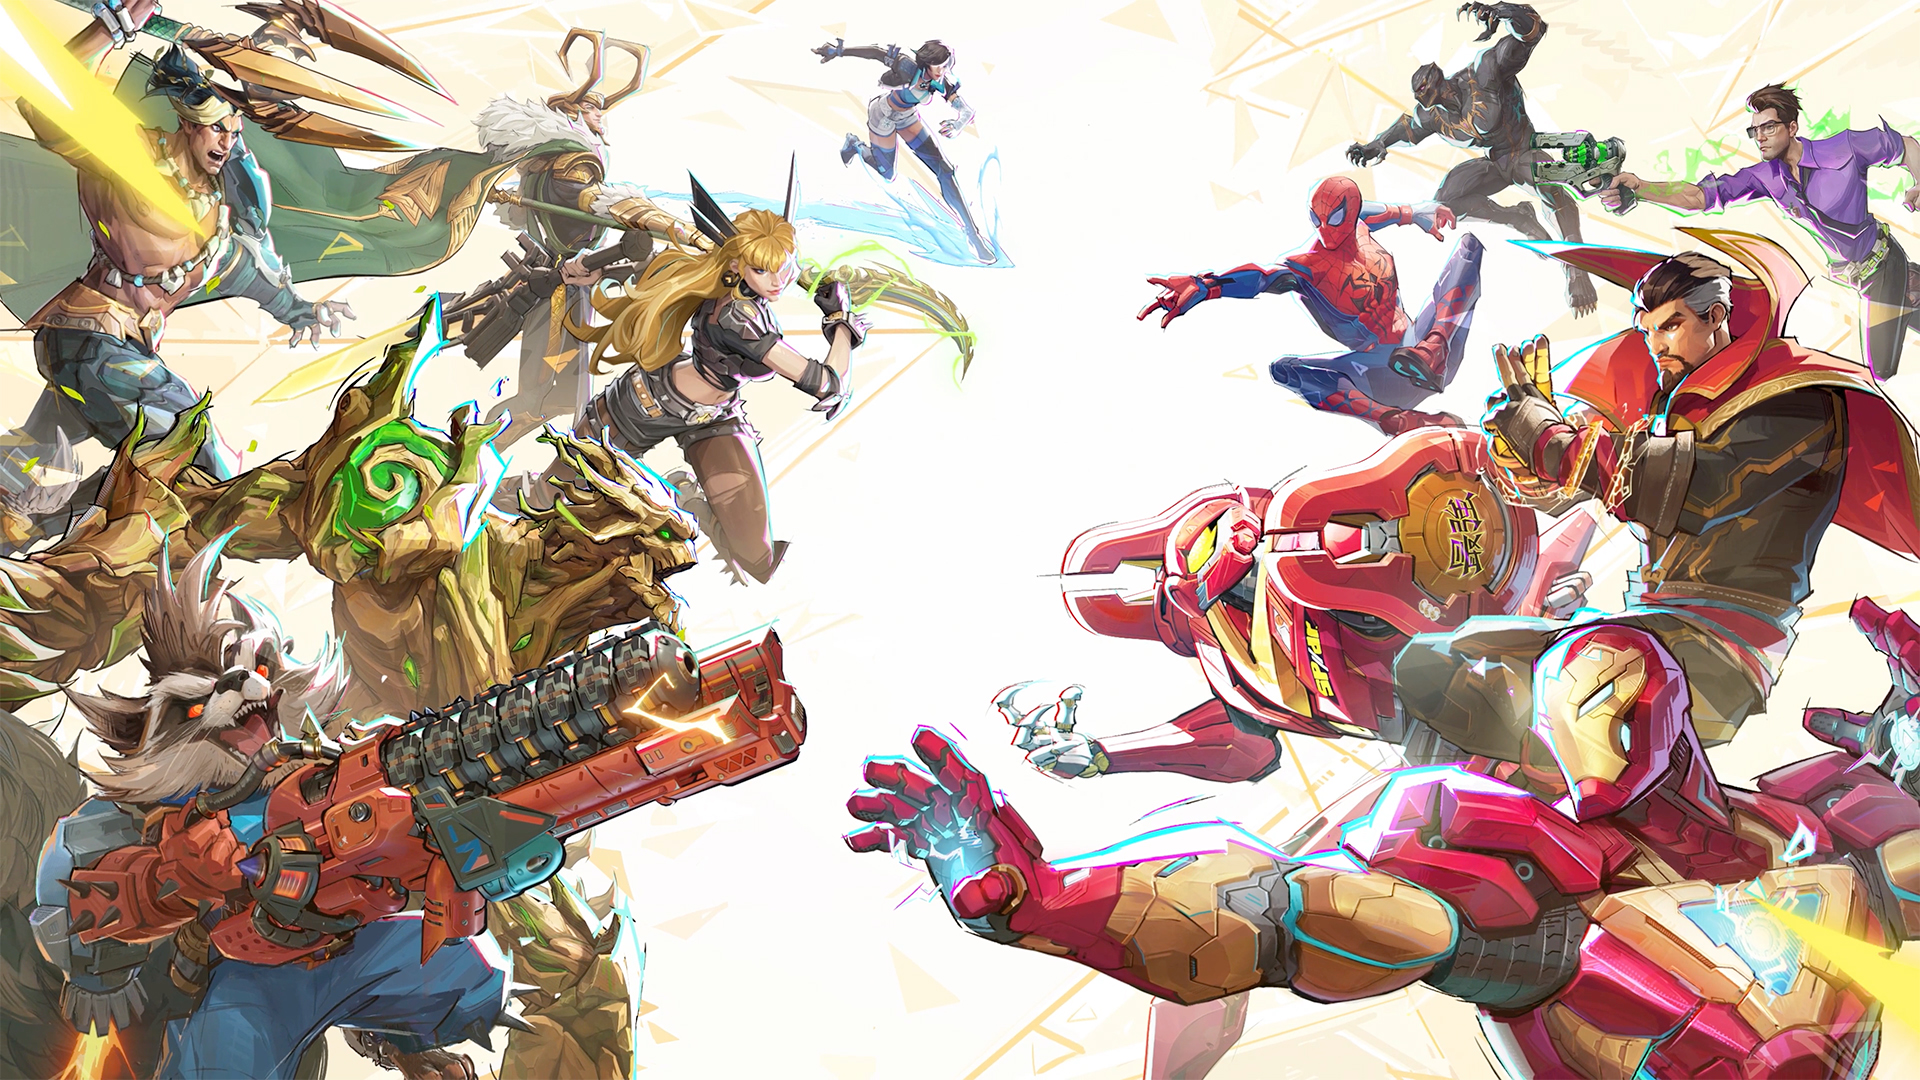 Artwork from Marvel Rivals, featuring stylized illustrated versions of Namor, Rocket Raccoon, Groot, Magik, Luna Snow, and Loki (on the left) facing off against Iron Man, Peni Parker, Spider-Man, Doctor Strange, Black Panther, and Bruce Banner (on the right)